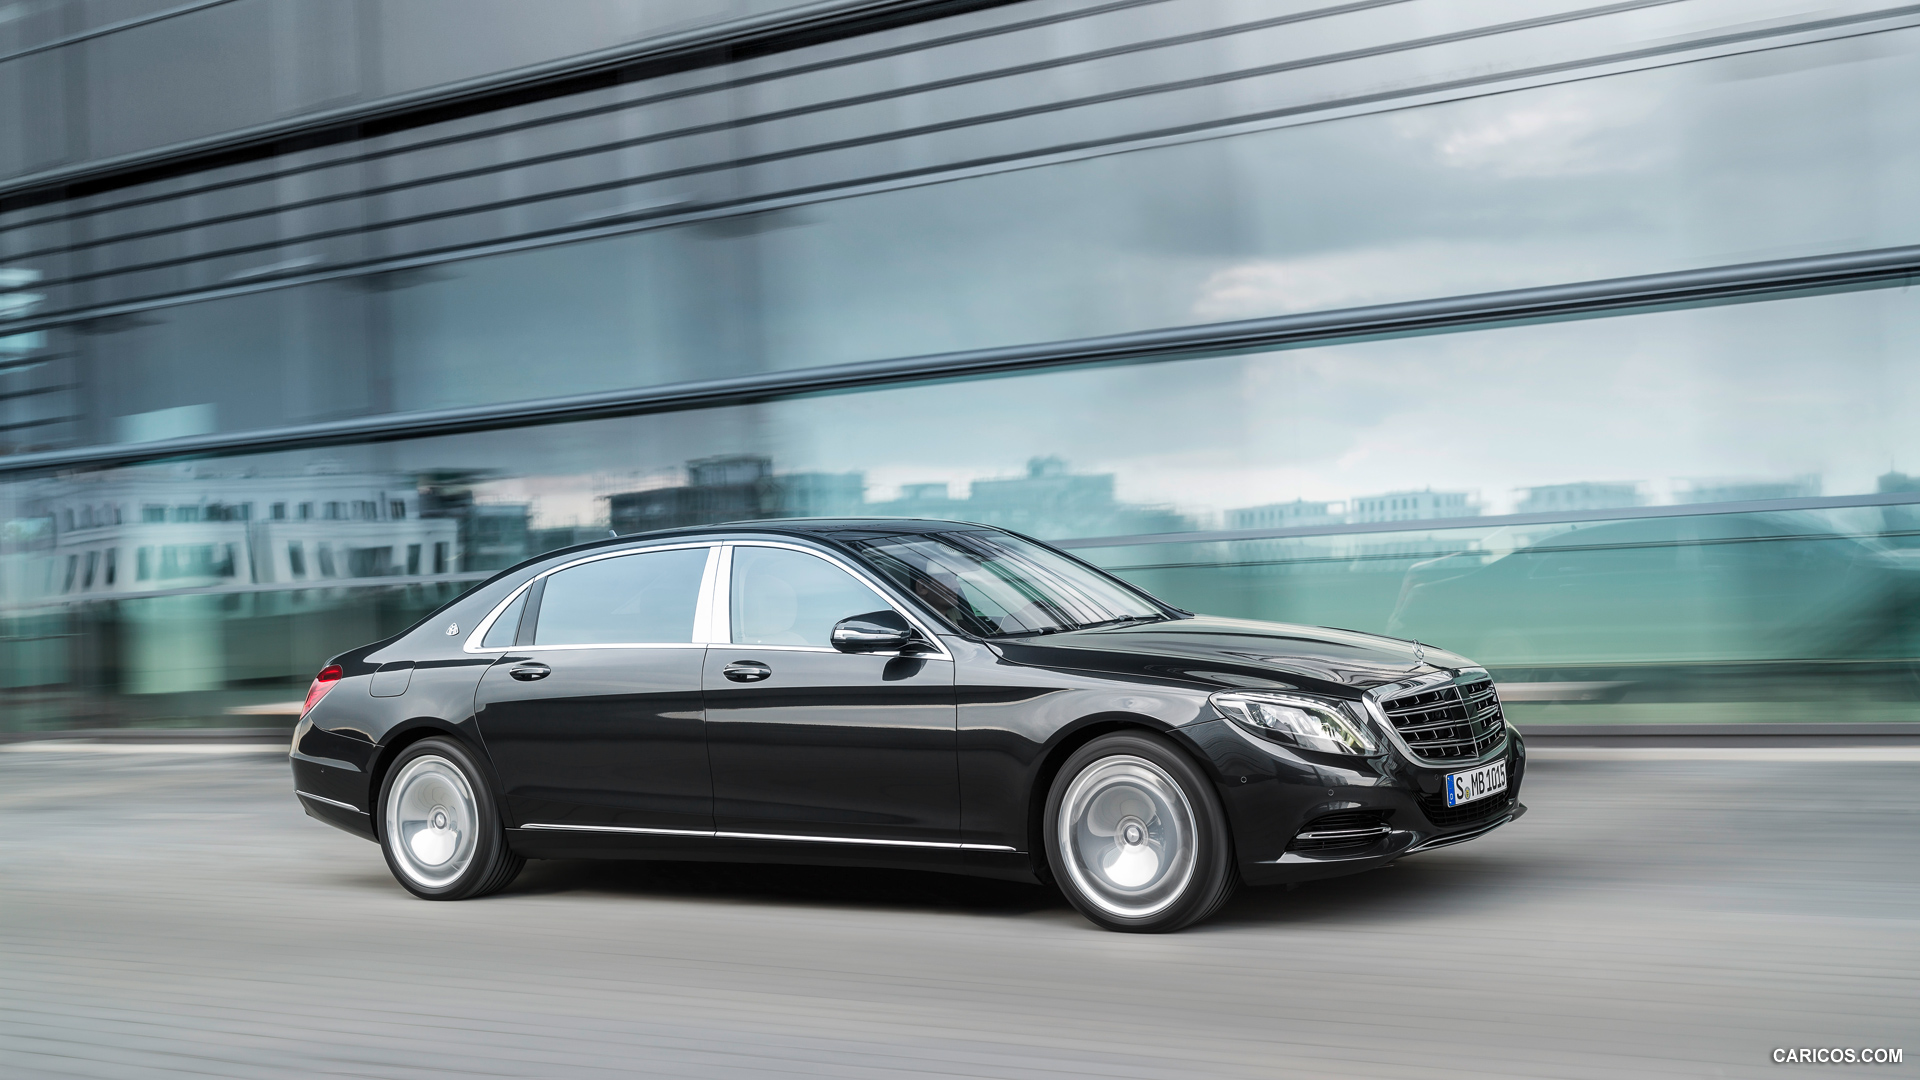 2016 Mercedes-Maybach S-Class S600 - Side, #2 of 225